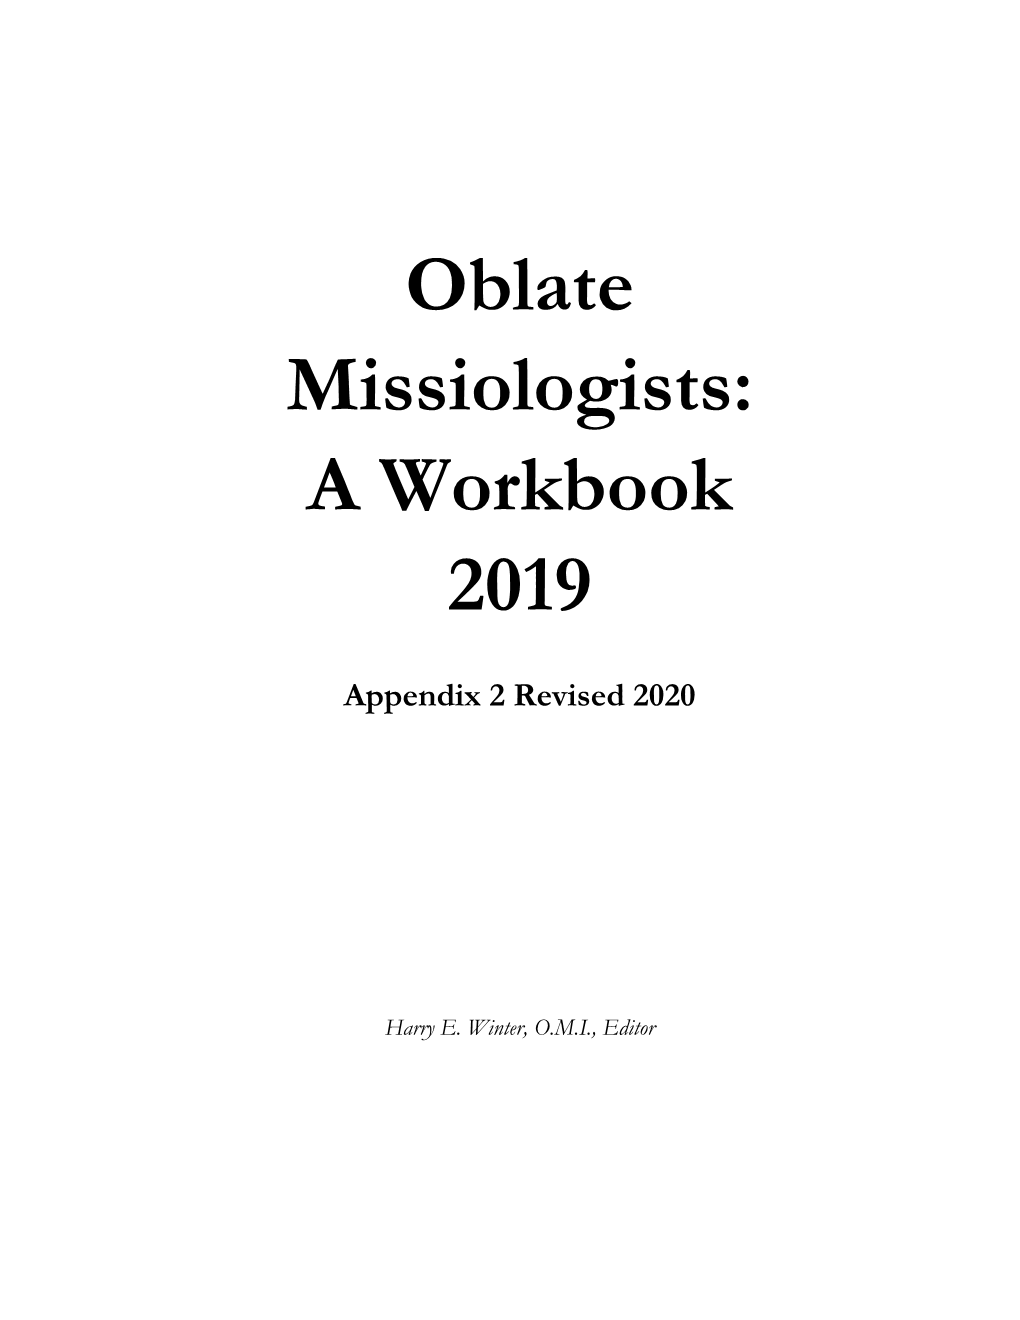 Oblate Missiologists: a Workbook